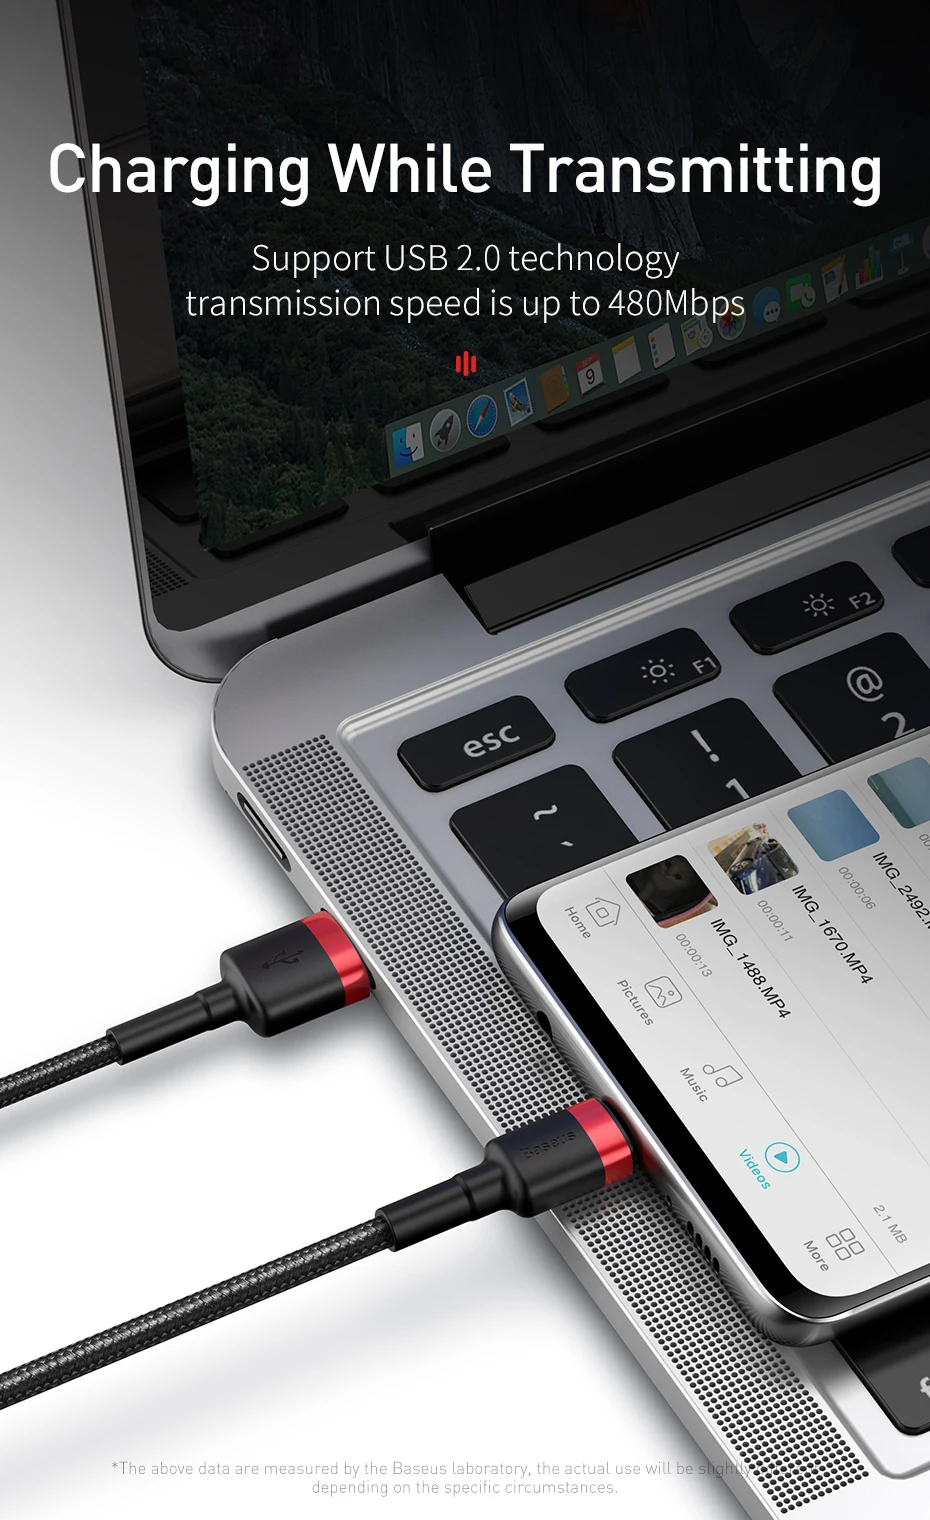 Baseus USB C Cable Type C Cable for Samsung S20 S10 Qucik Charge 3.0 USB C Cable Phone Wire Cord USB Type C Cable for Xiaomi